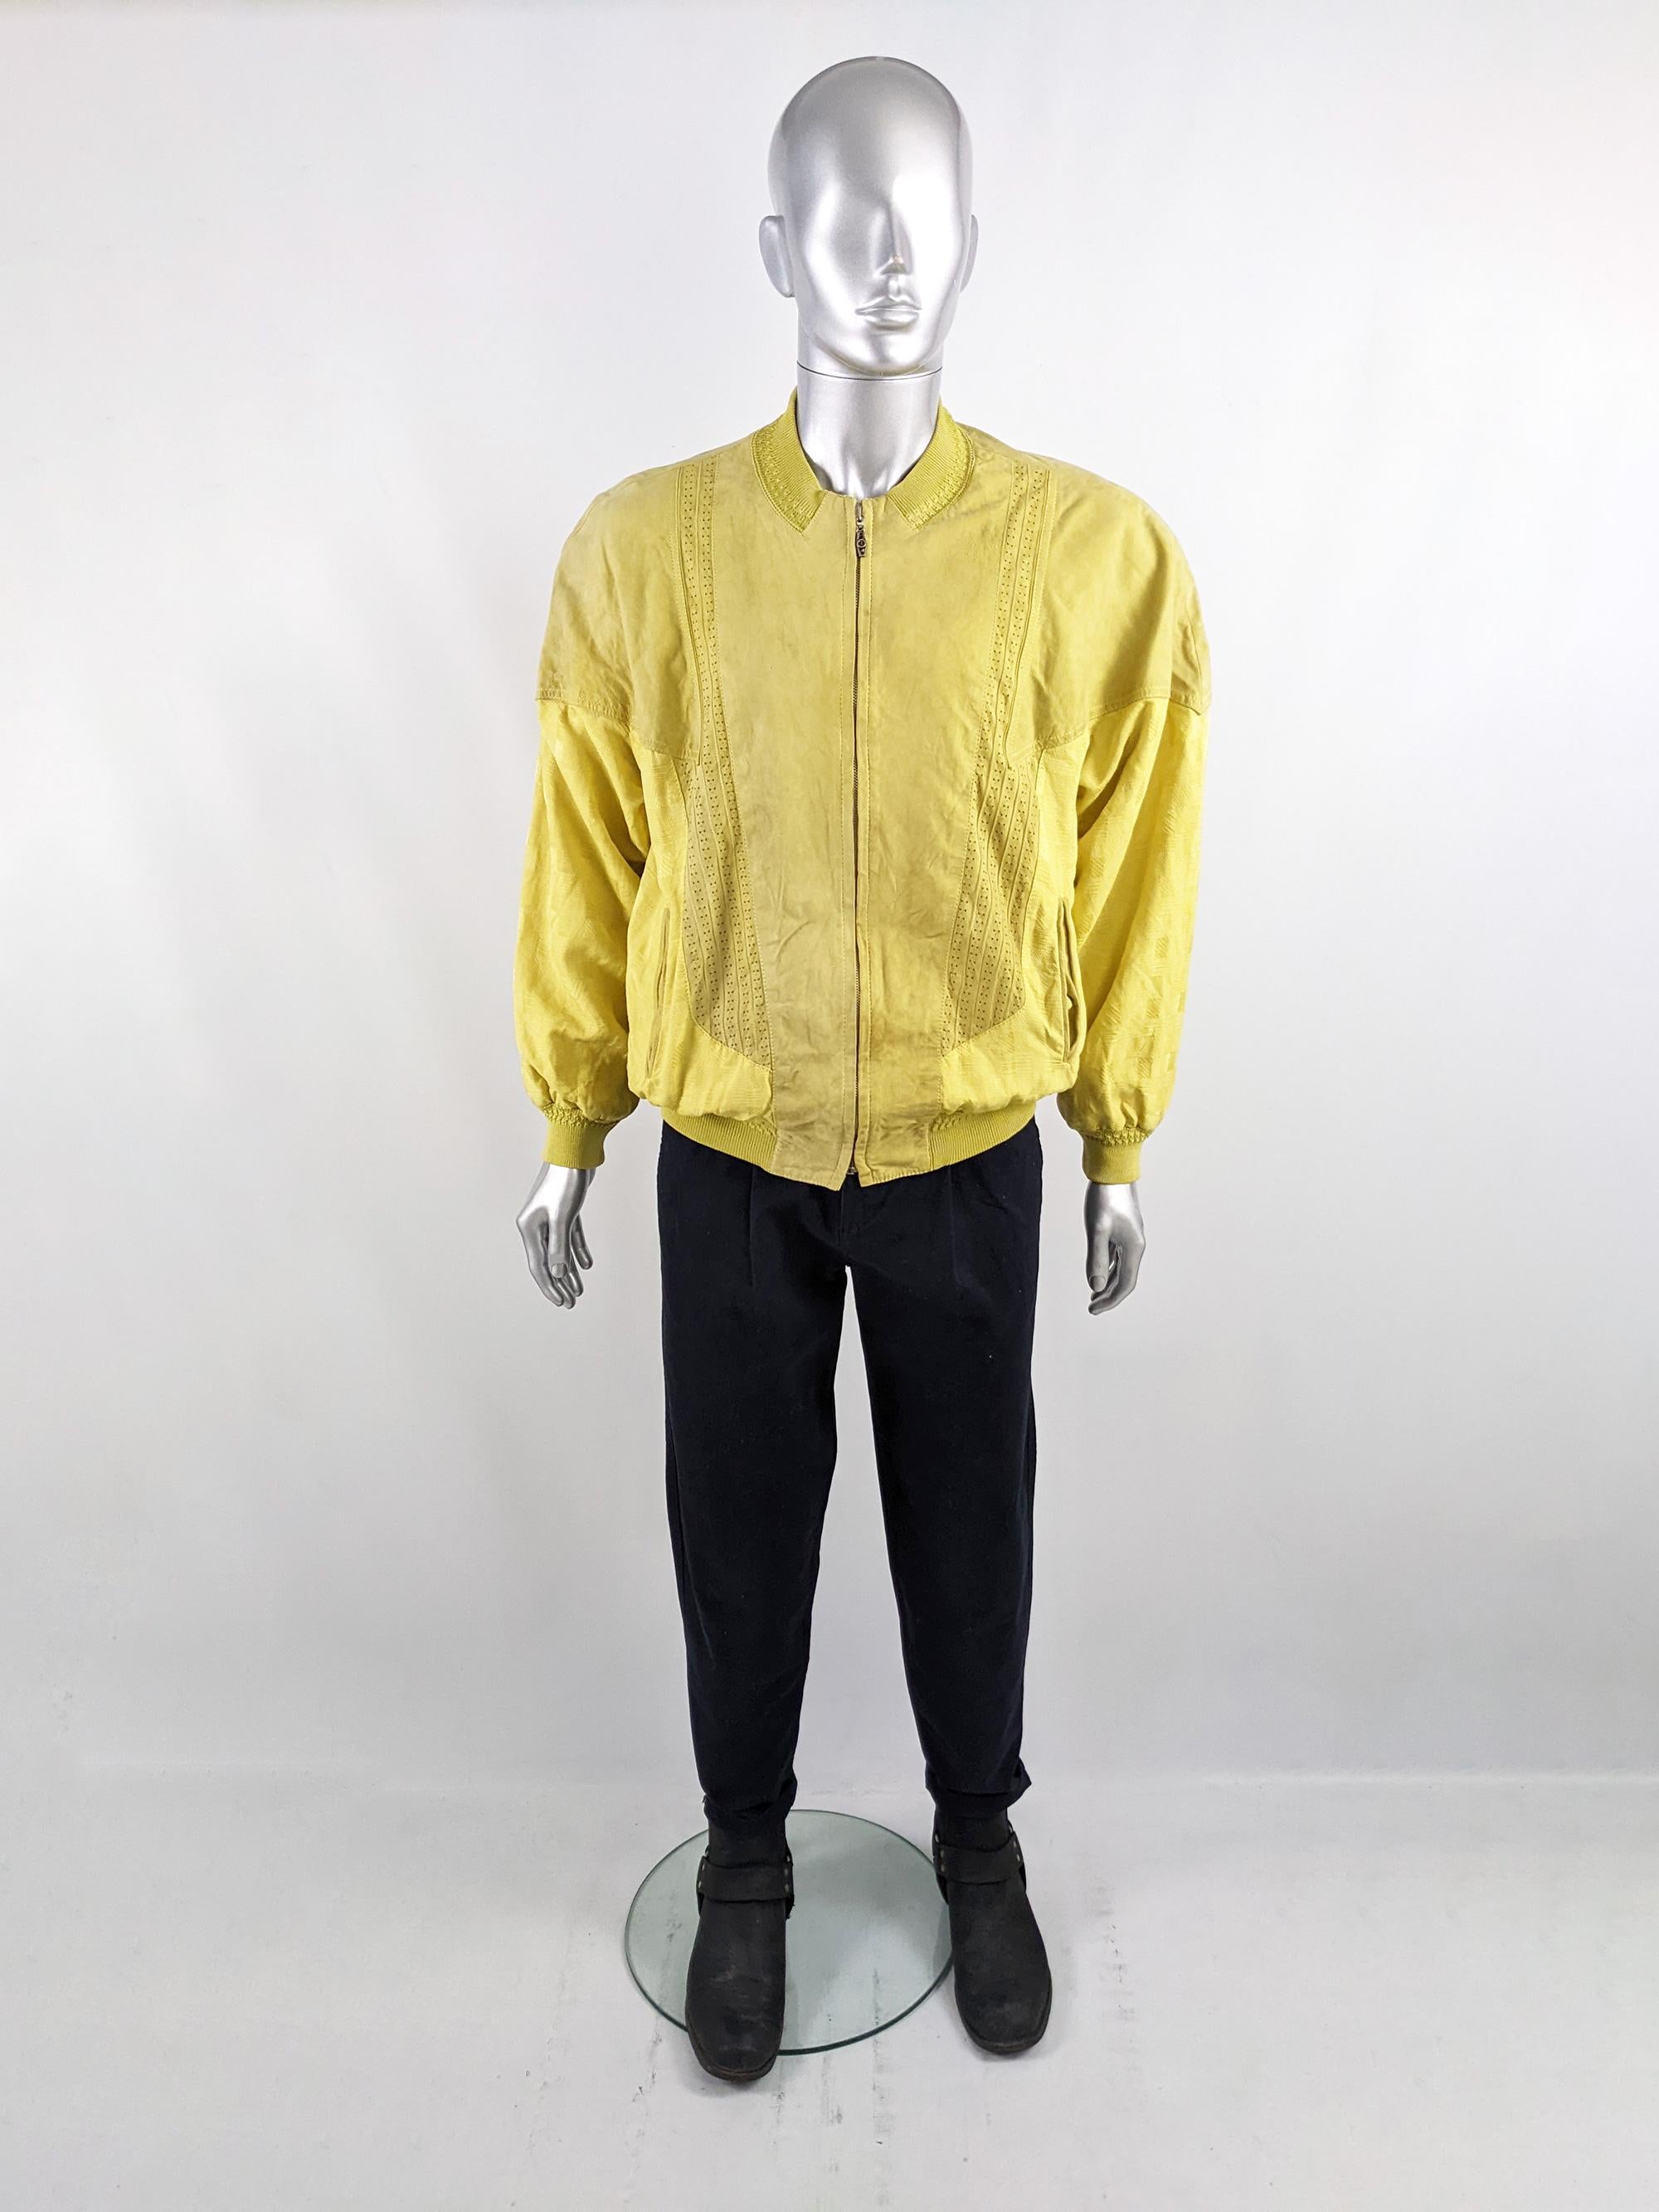 An incredible and rare vintage mens bomber jacket from the 80s by luxury British menswear store, Richard Gelding - of London's exclusive Mayfair. In a yellow pure silk fabric with a jacquard weave and yellow suede on the front and around the back